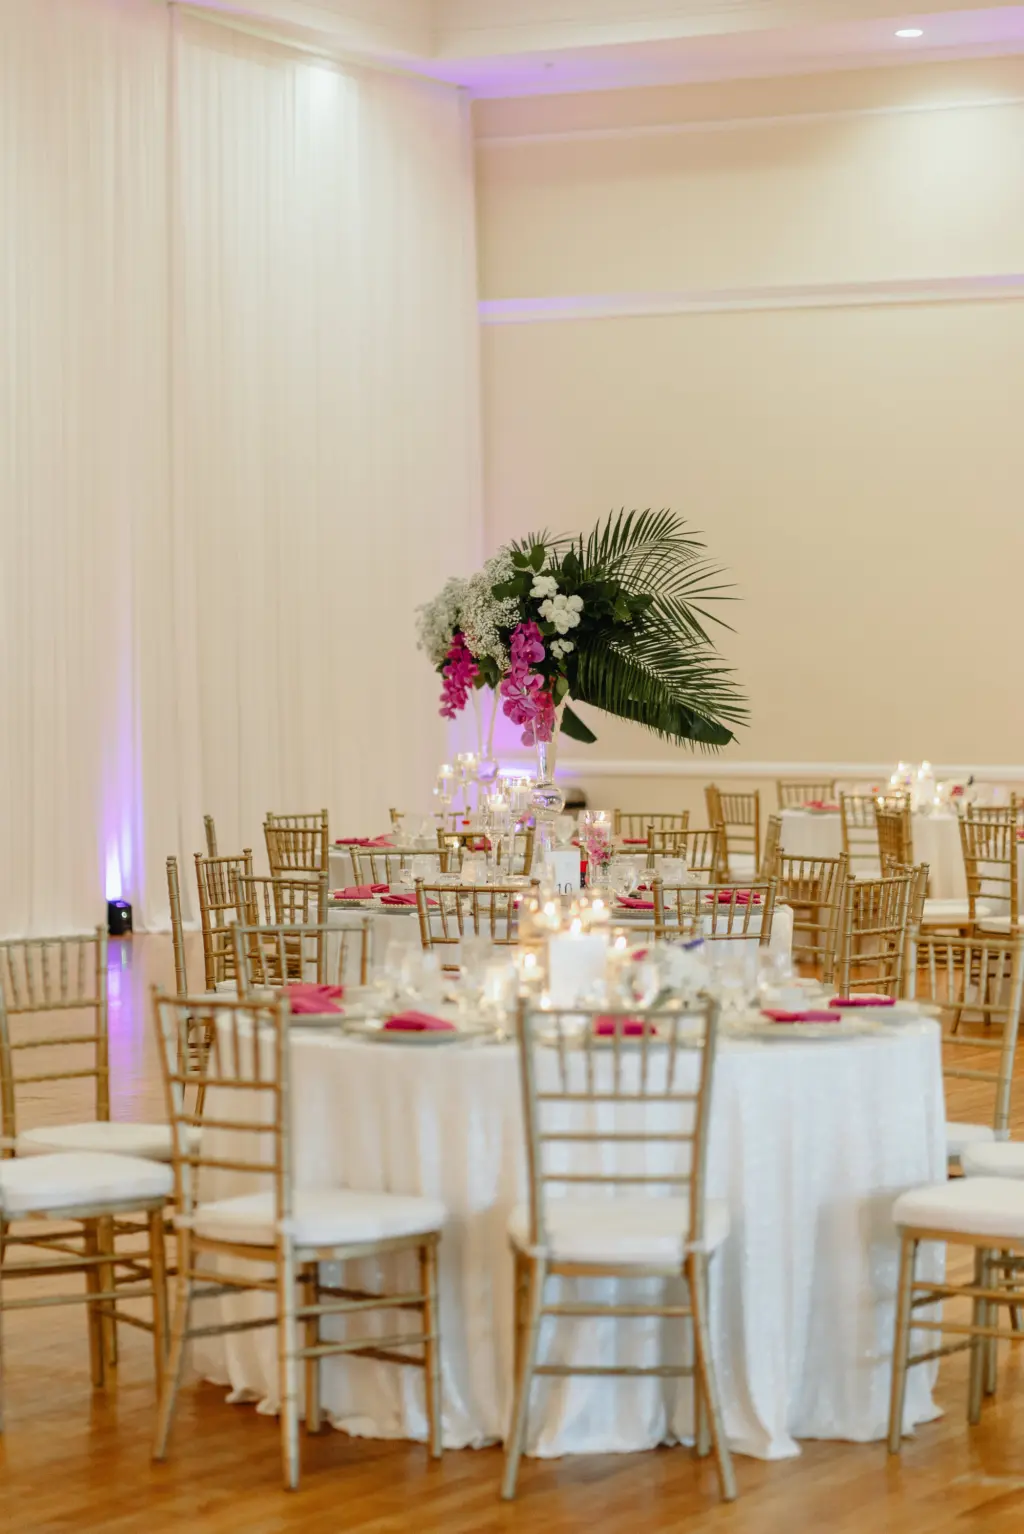 Timeless White Linen Circle Reception Tables with Gold Chiavari Wedding Chairs | Tropical Leave Wedding Centerpiece with Purple Orchids and White Floral Detailing in Asian Fusion Wedding Reception Décor Ideas | Tampa Rental Company A Chair Affair